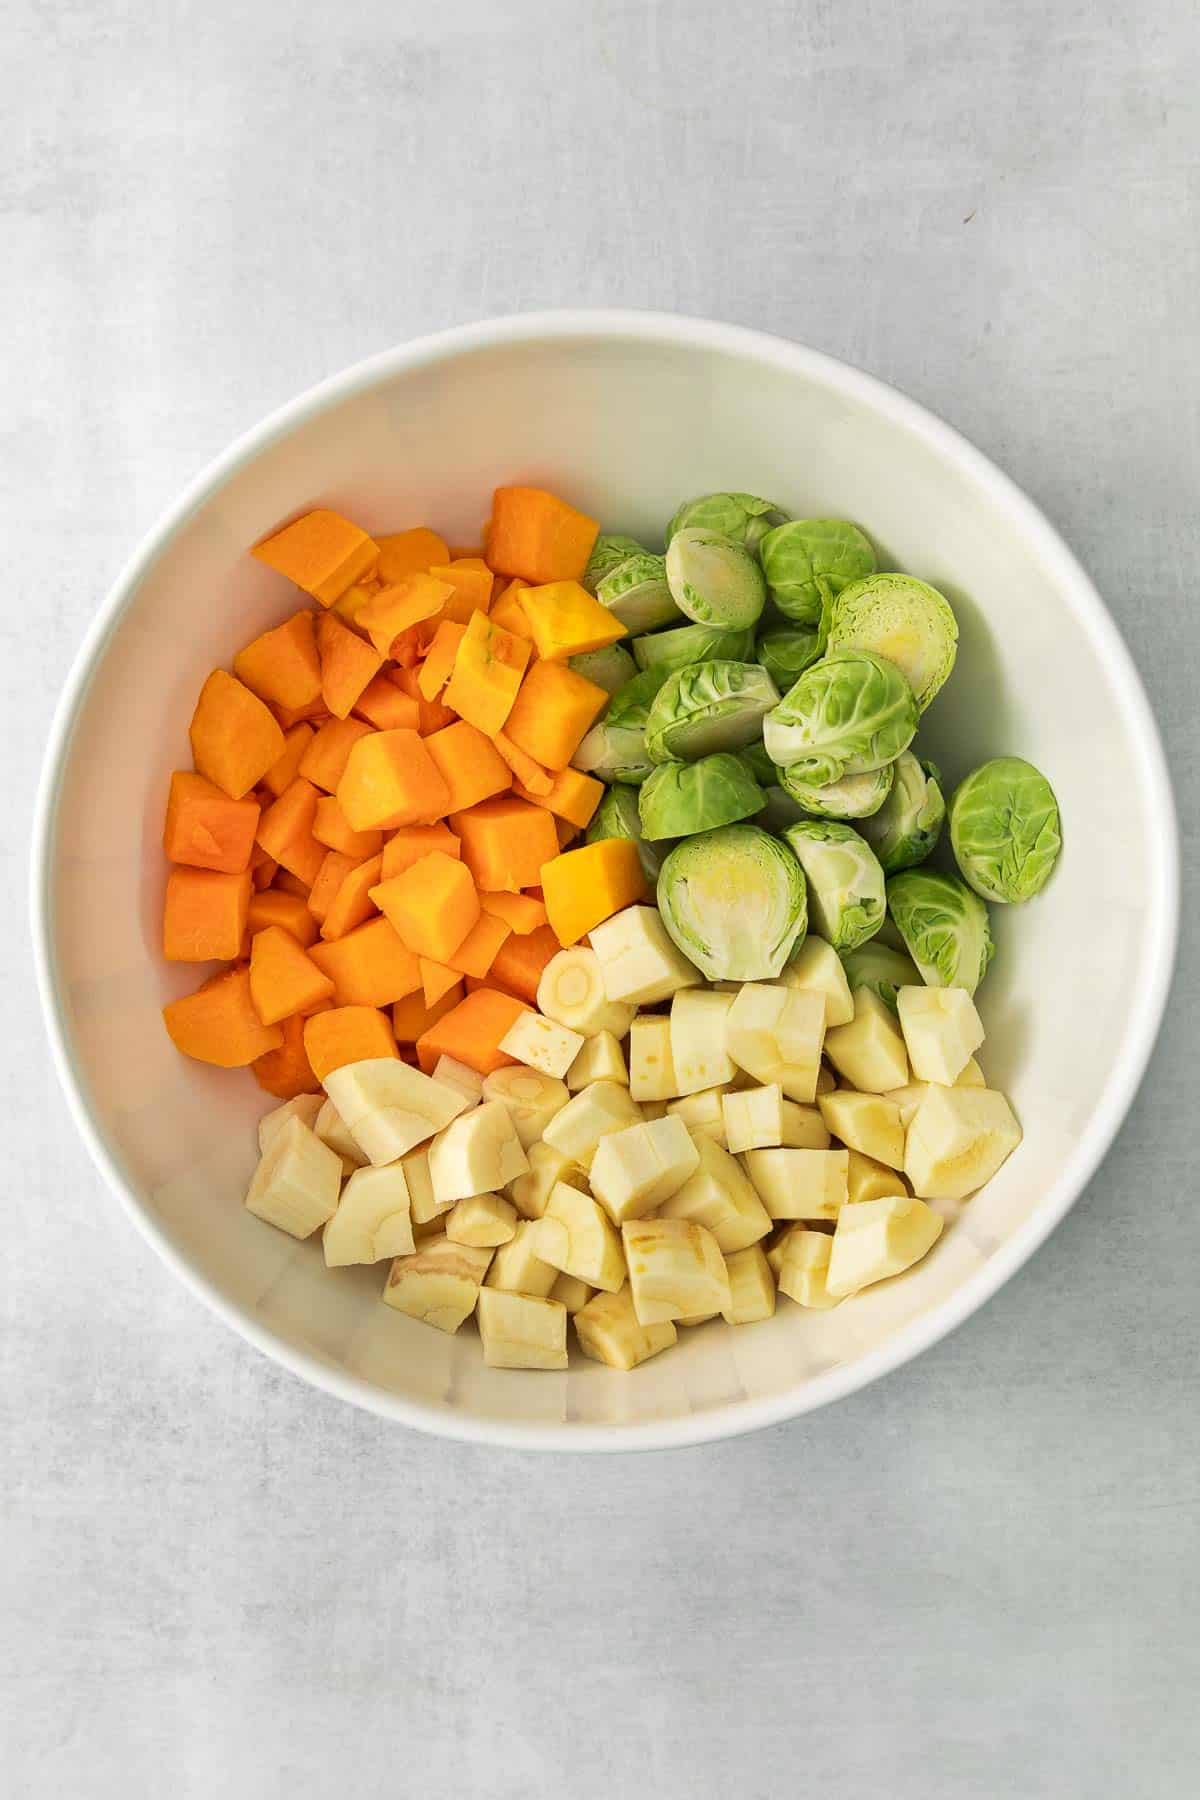 white bowl with sliced brussel sprouts, butternut squash and parsnips.